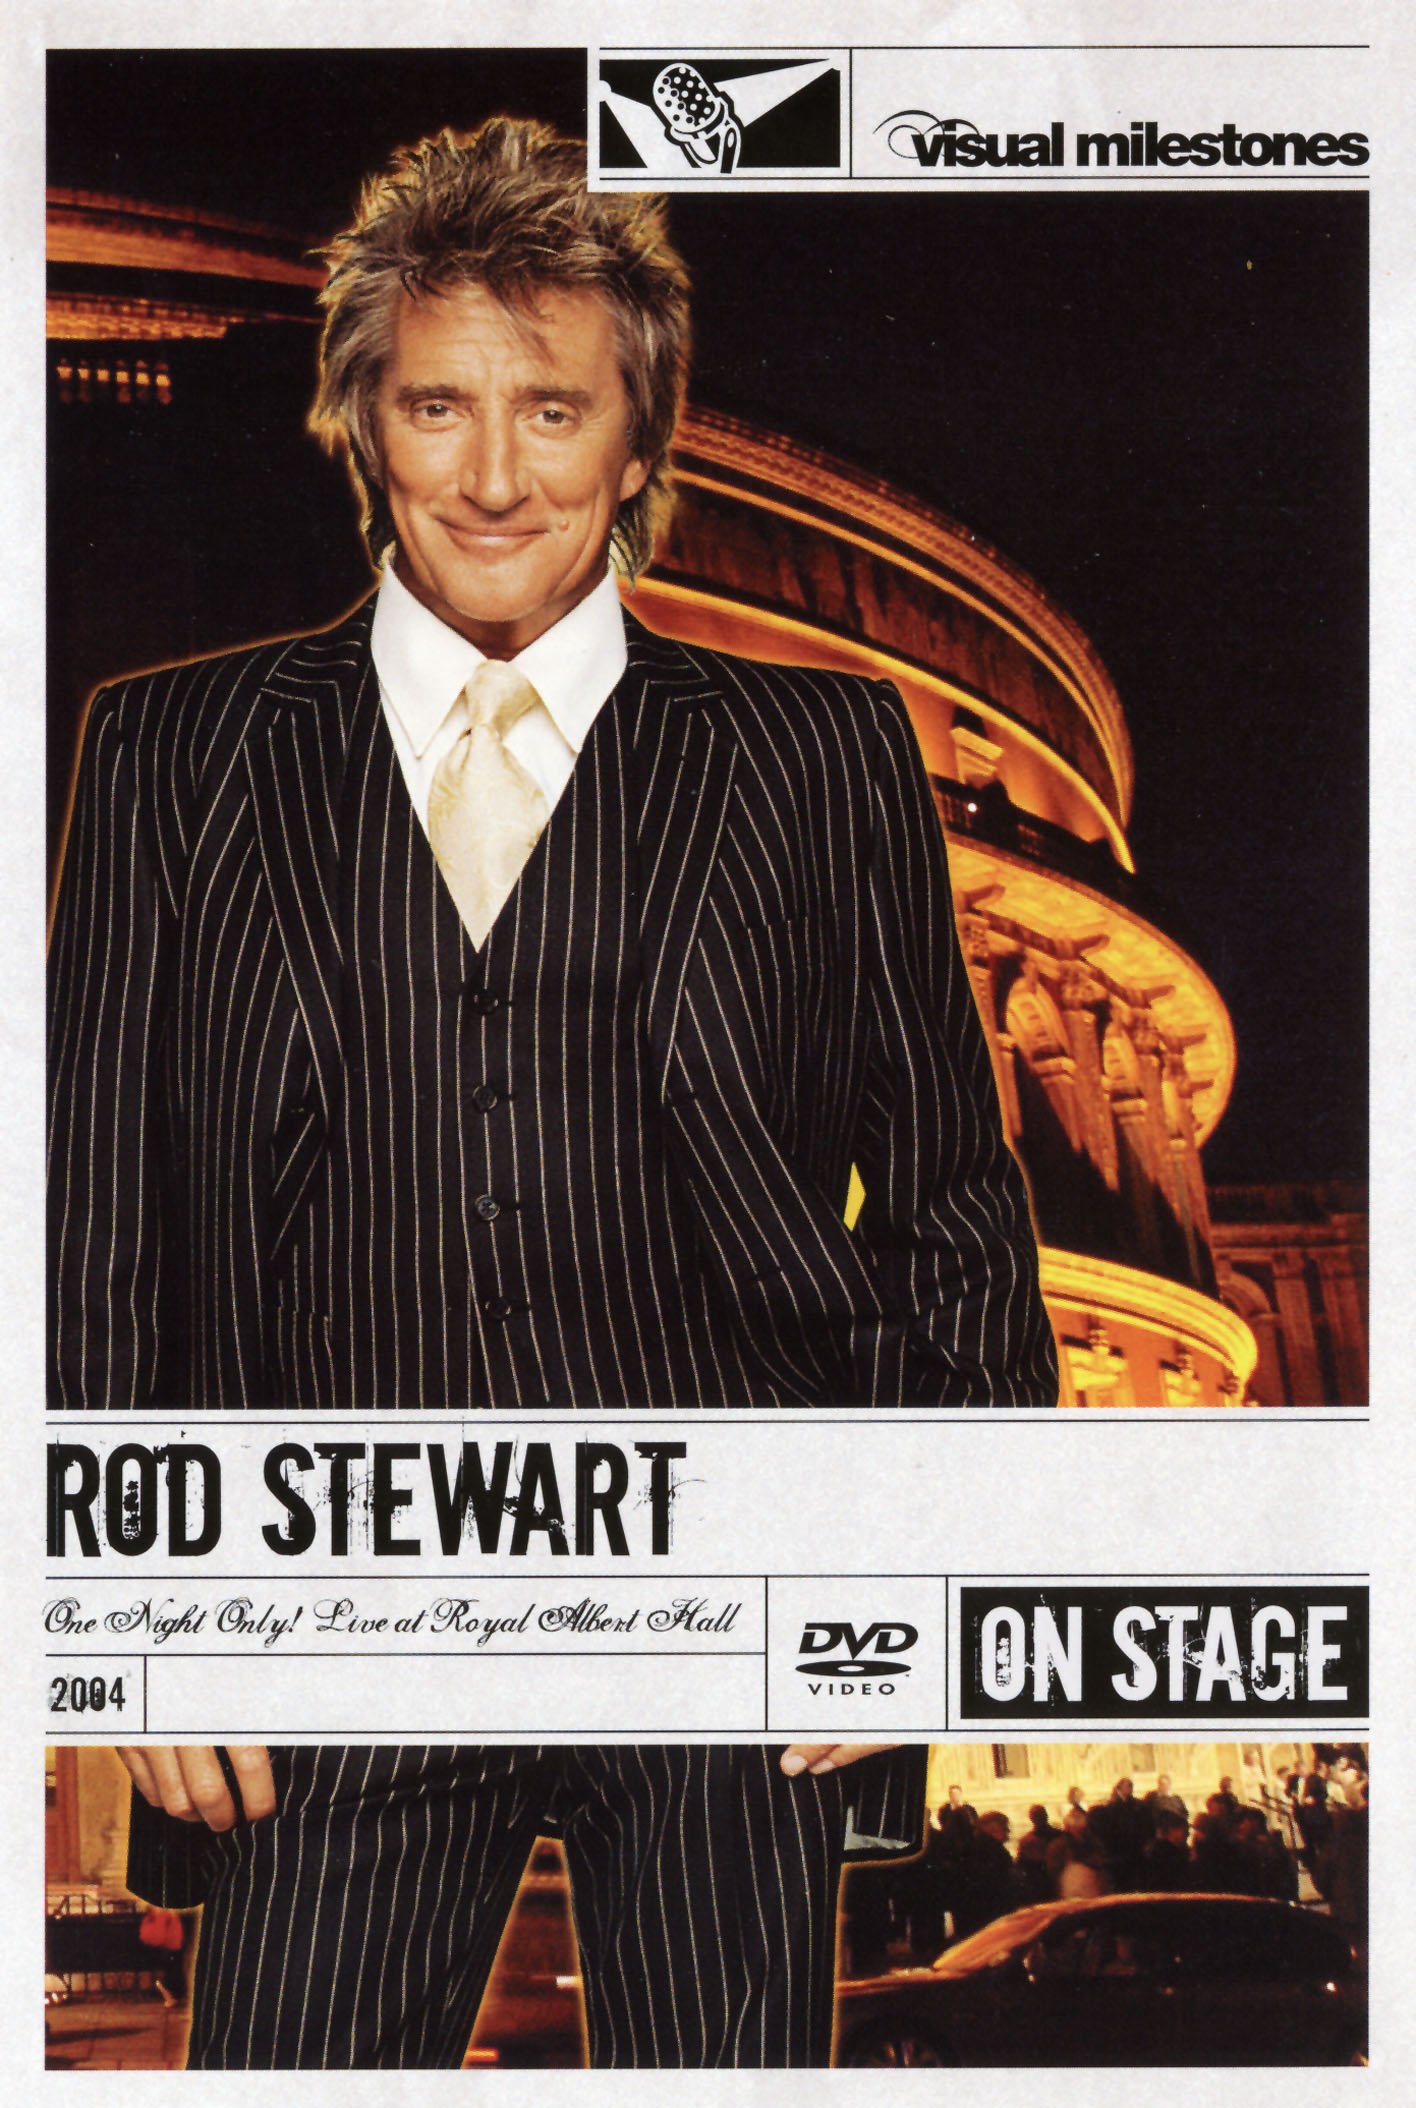 One Night Only! Rod Stewart Live At Royal Albert Hall